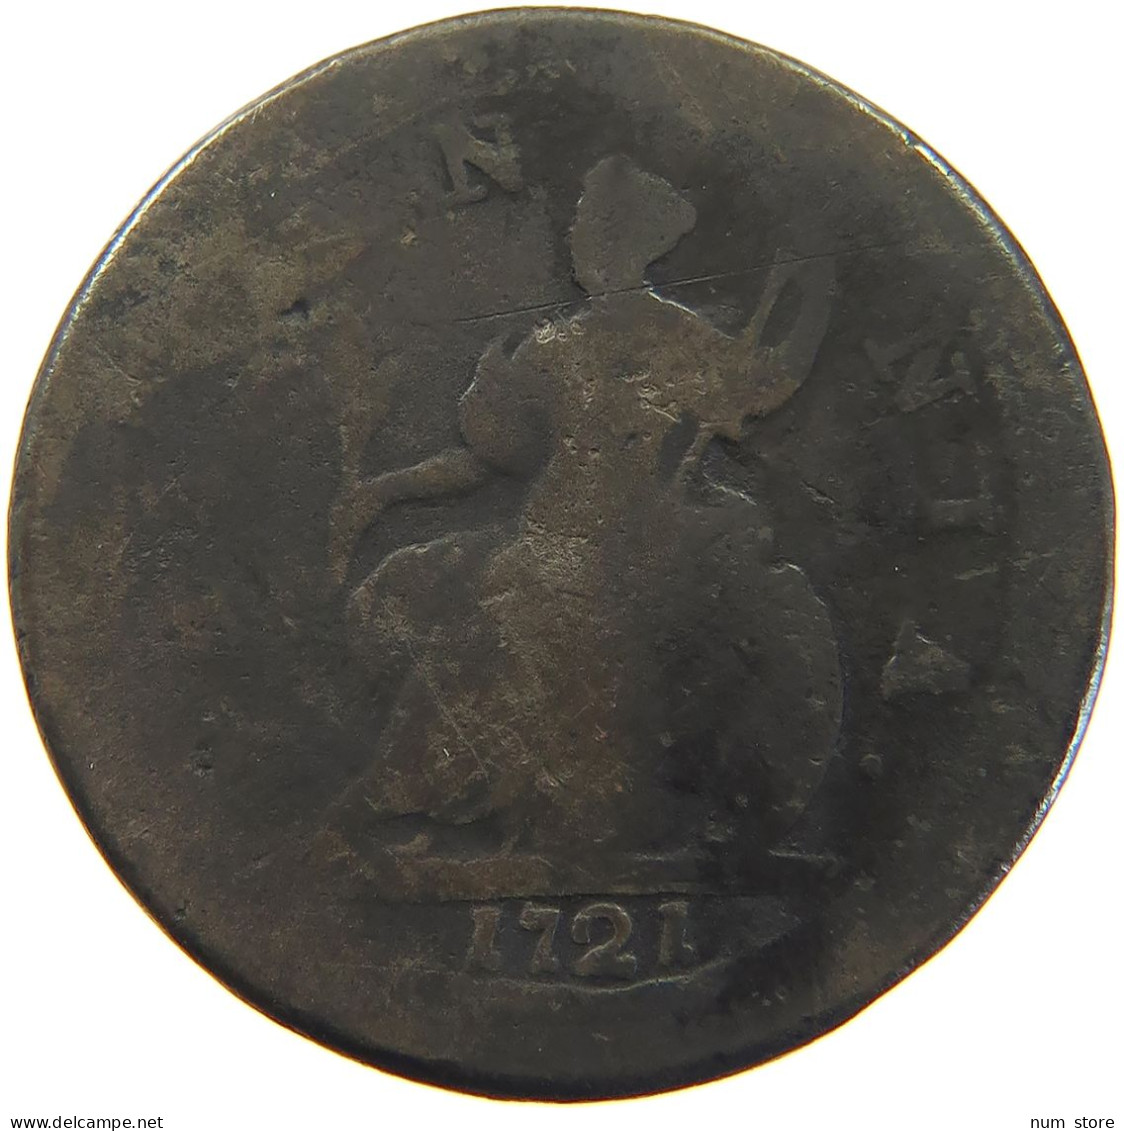 GREAT BRITAIN HALFPENNY 1721 George I. (1714-1727) #t155 0207 - B. 1/2 Penny